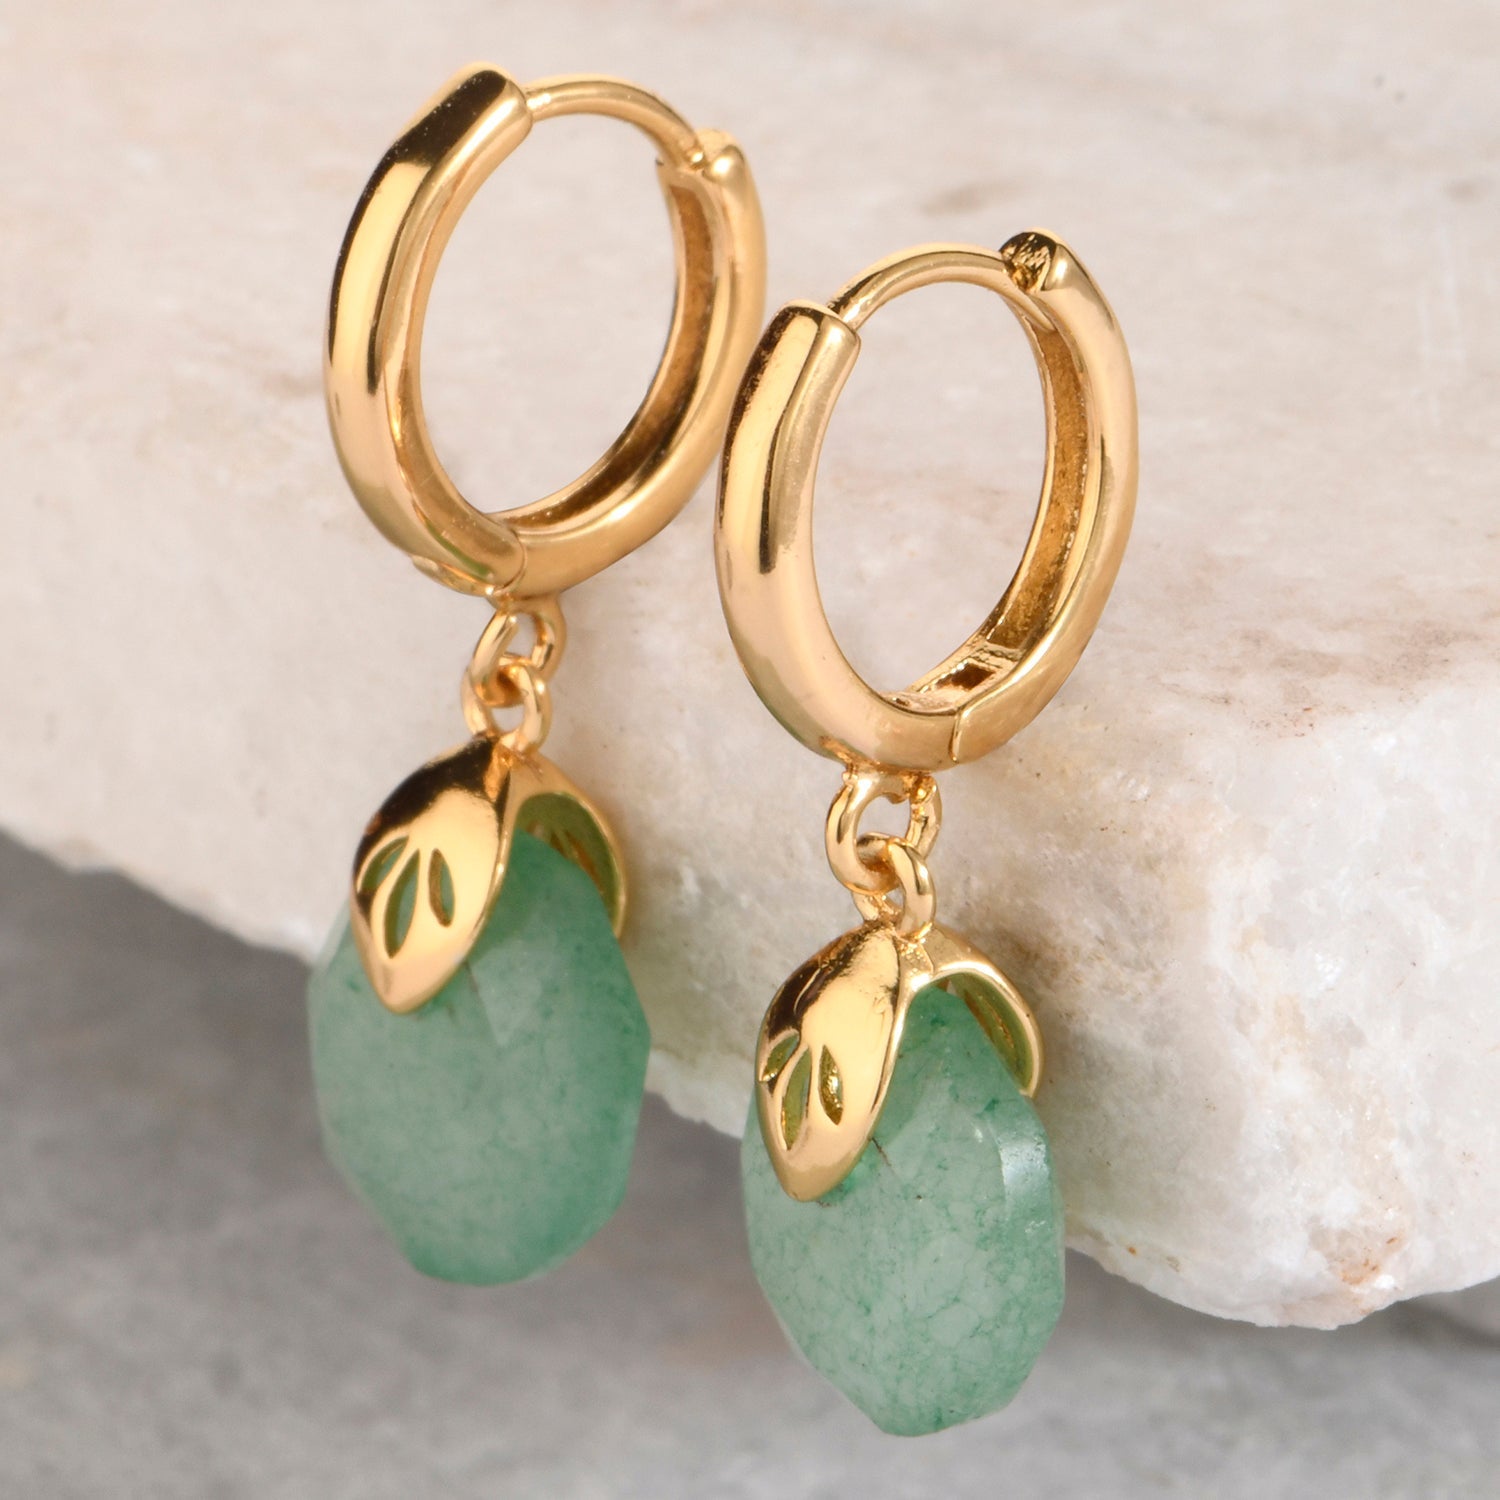 Real Gold Plated Circle Healing Stone Hoops Earring Adventurine For Women By Accessorize London